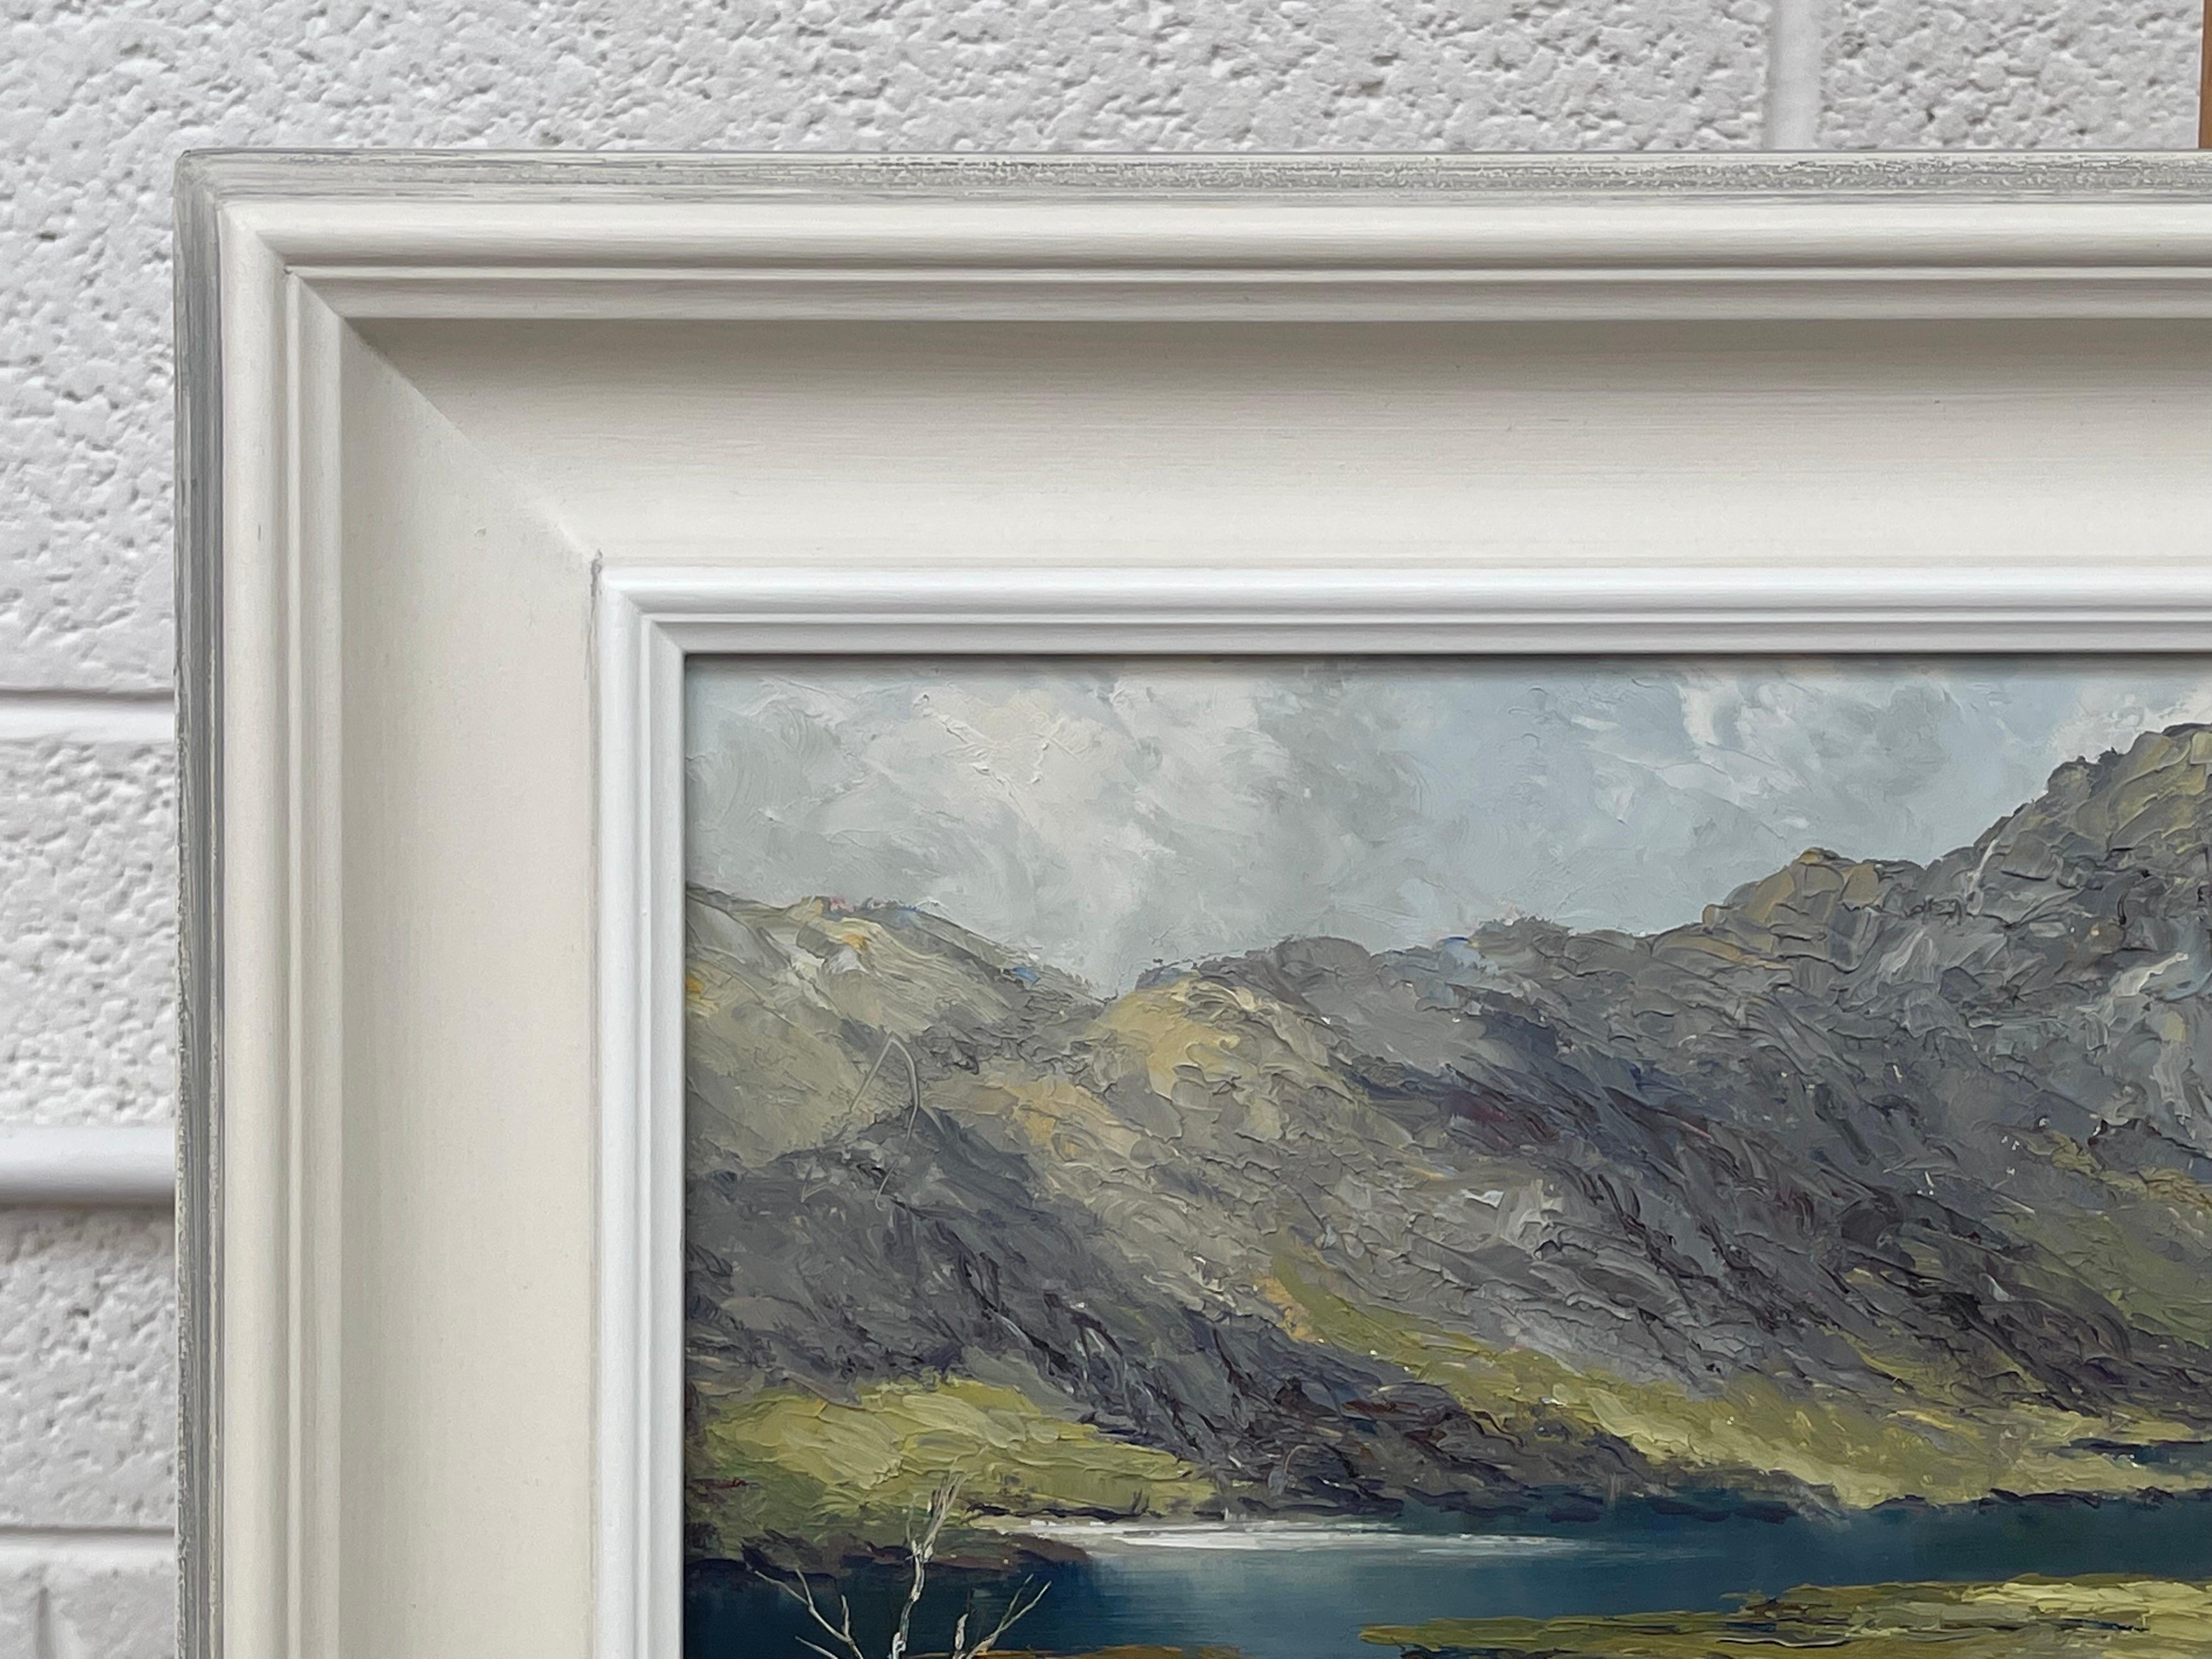 Mountain Lake Landscape Impasto Oil Painting by 20th Century British Artist, Charles Wyatt Warren (1908-1993)

Art measures 21 x 9 inches 
Frame measures 26 x 14 inches 

Charles Wyatt Warren (1908-1993) was a self-taught painter and an enthusiastic